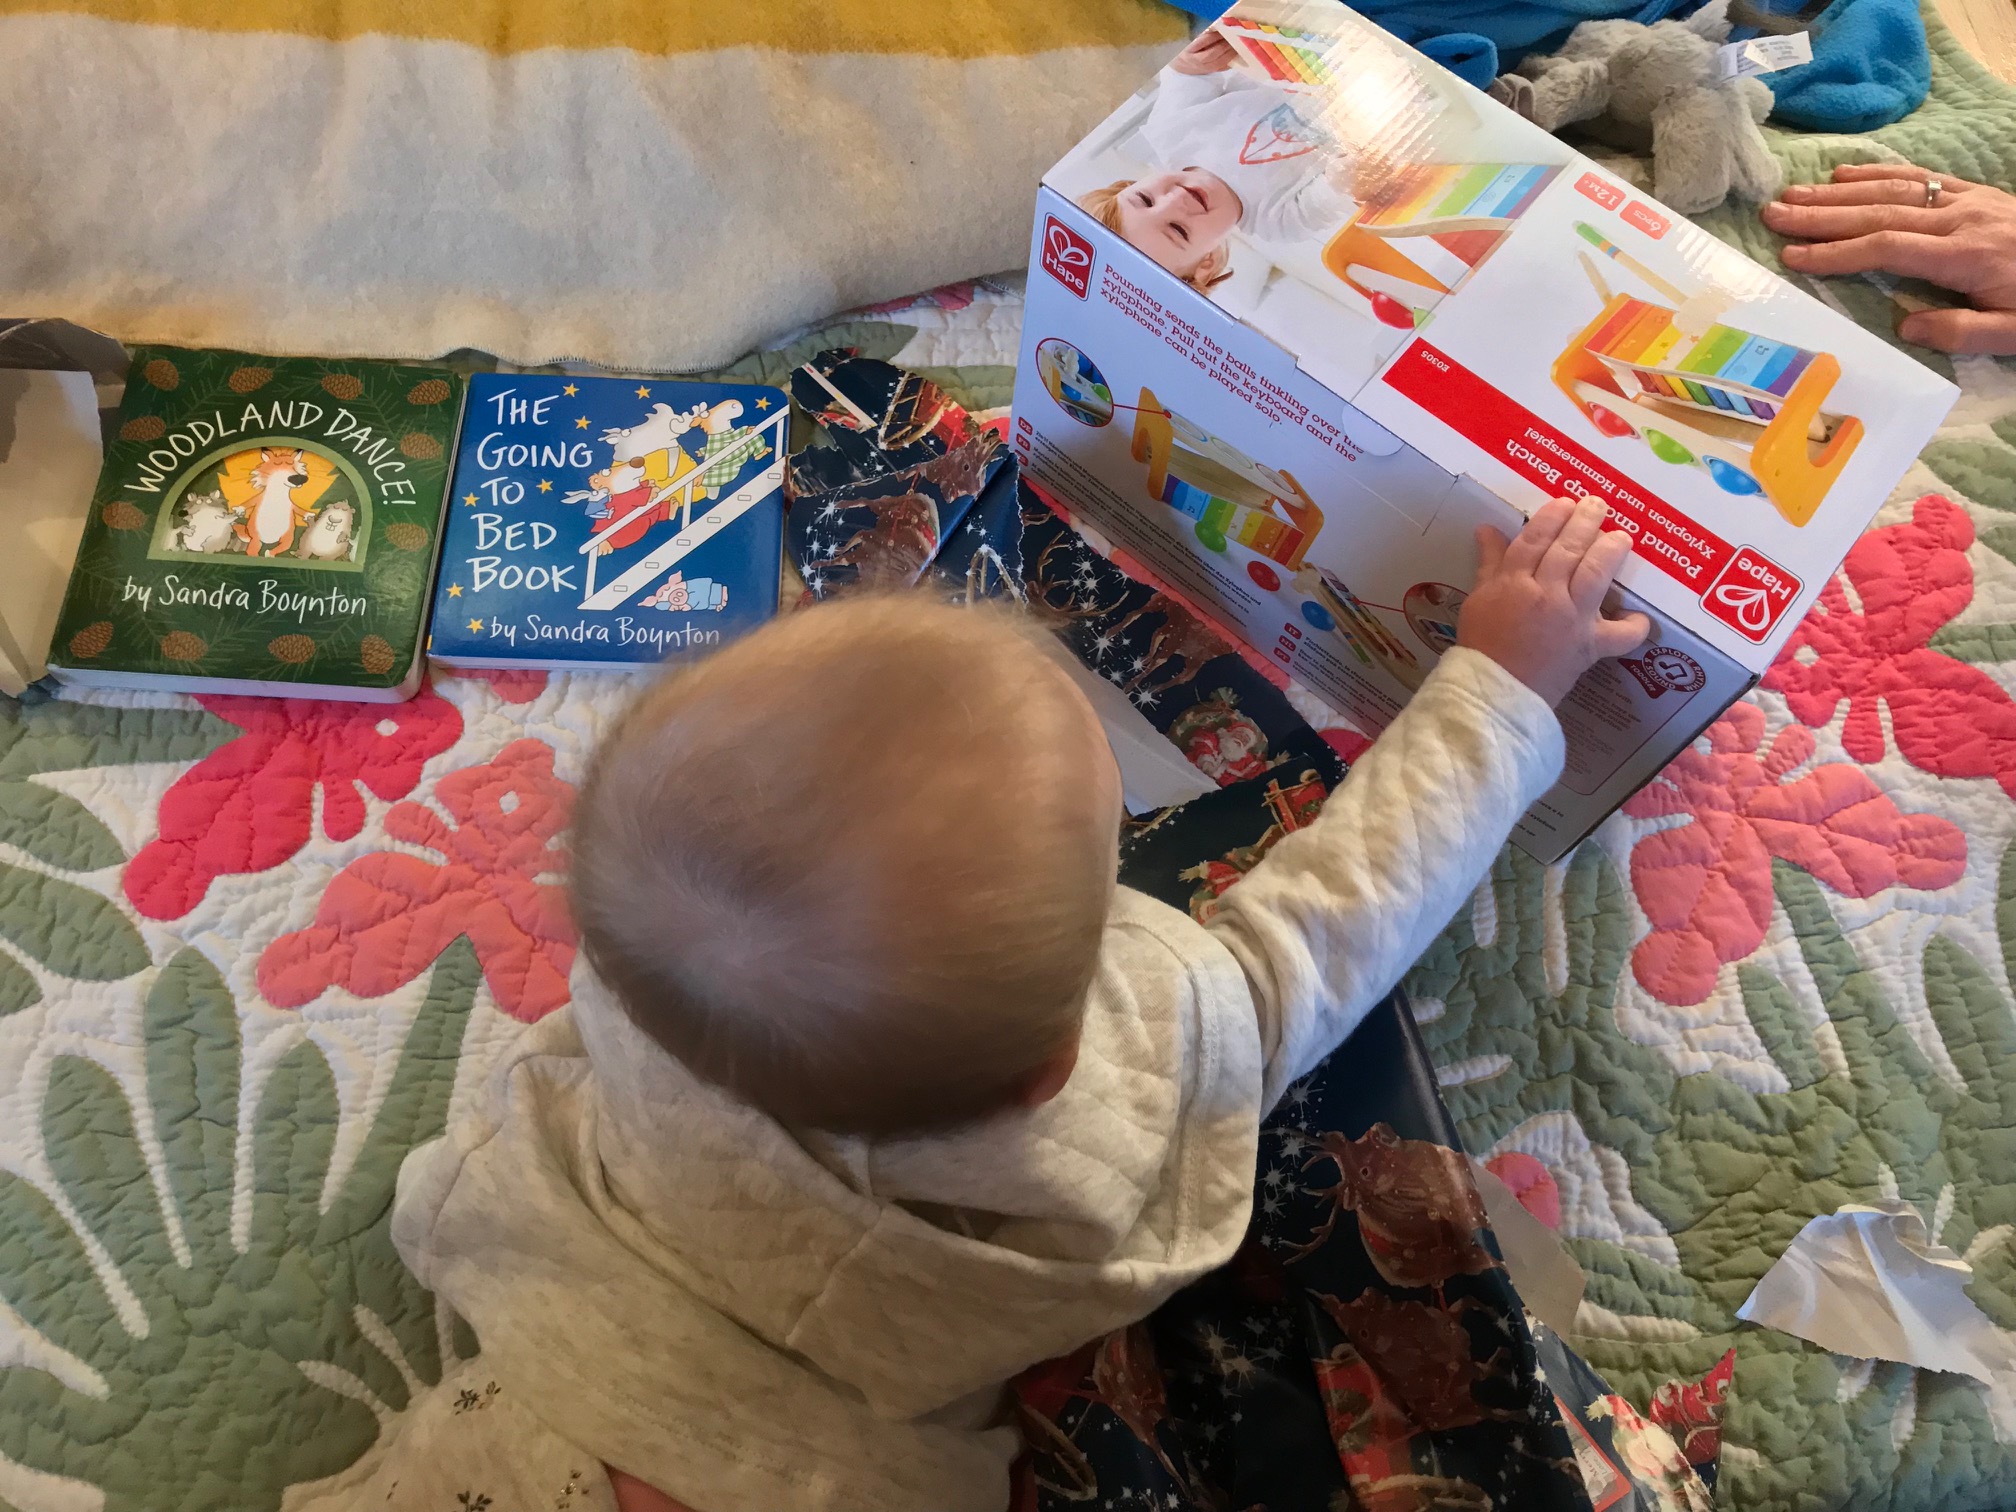 The baby in the Salem family opens a holiday gift. (Courtesy photo)